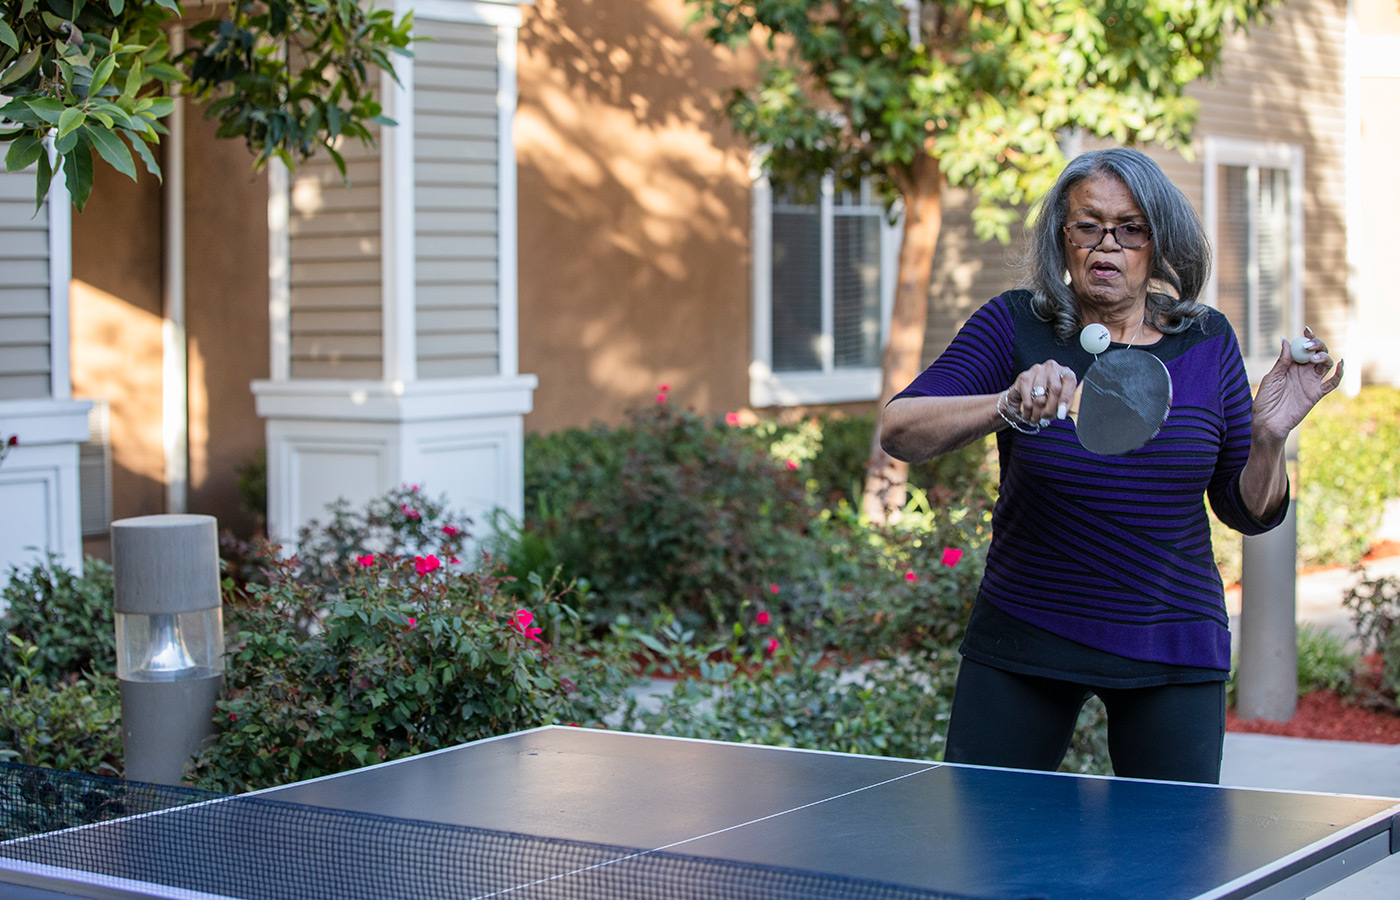 A resident is playing table tennis.